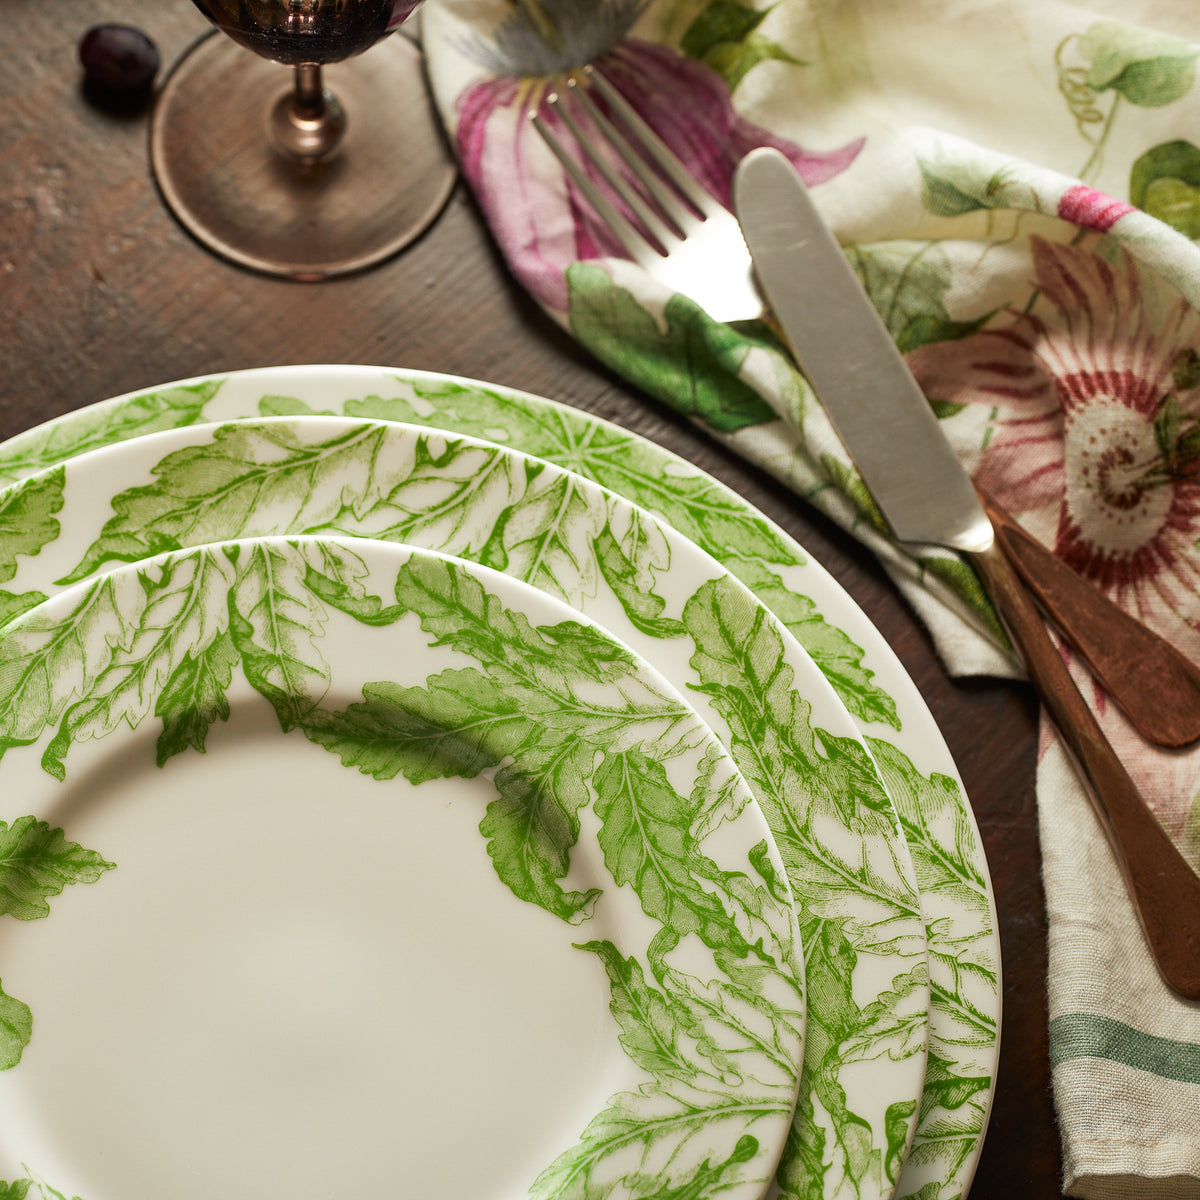 A set of three Freya Rimmed Charger Plates from Caskata Artisanal Home, with green leaf patterns, reminiscent of green florals, stacked on a wooden table, accompanied by a knife, fork, and floral napkin. A partial view of a wine glass is visible in the top left corner.